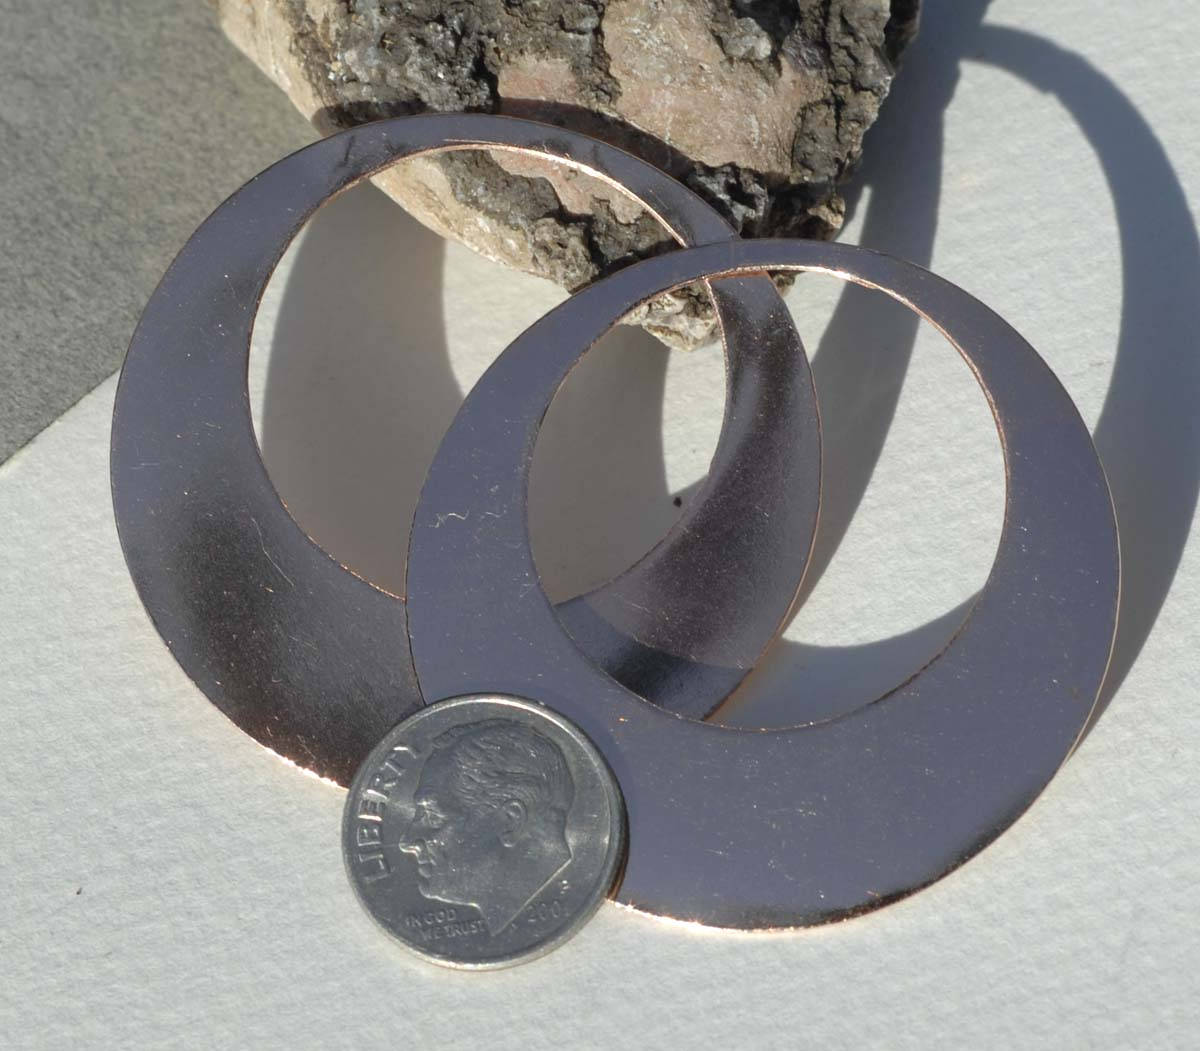 45mm Jewelry Blanks Hoops 26G for Earrings or Pendant Offset Circle for Enameling Stamping Texturing, Supplies - 4 Pieces